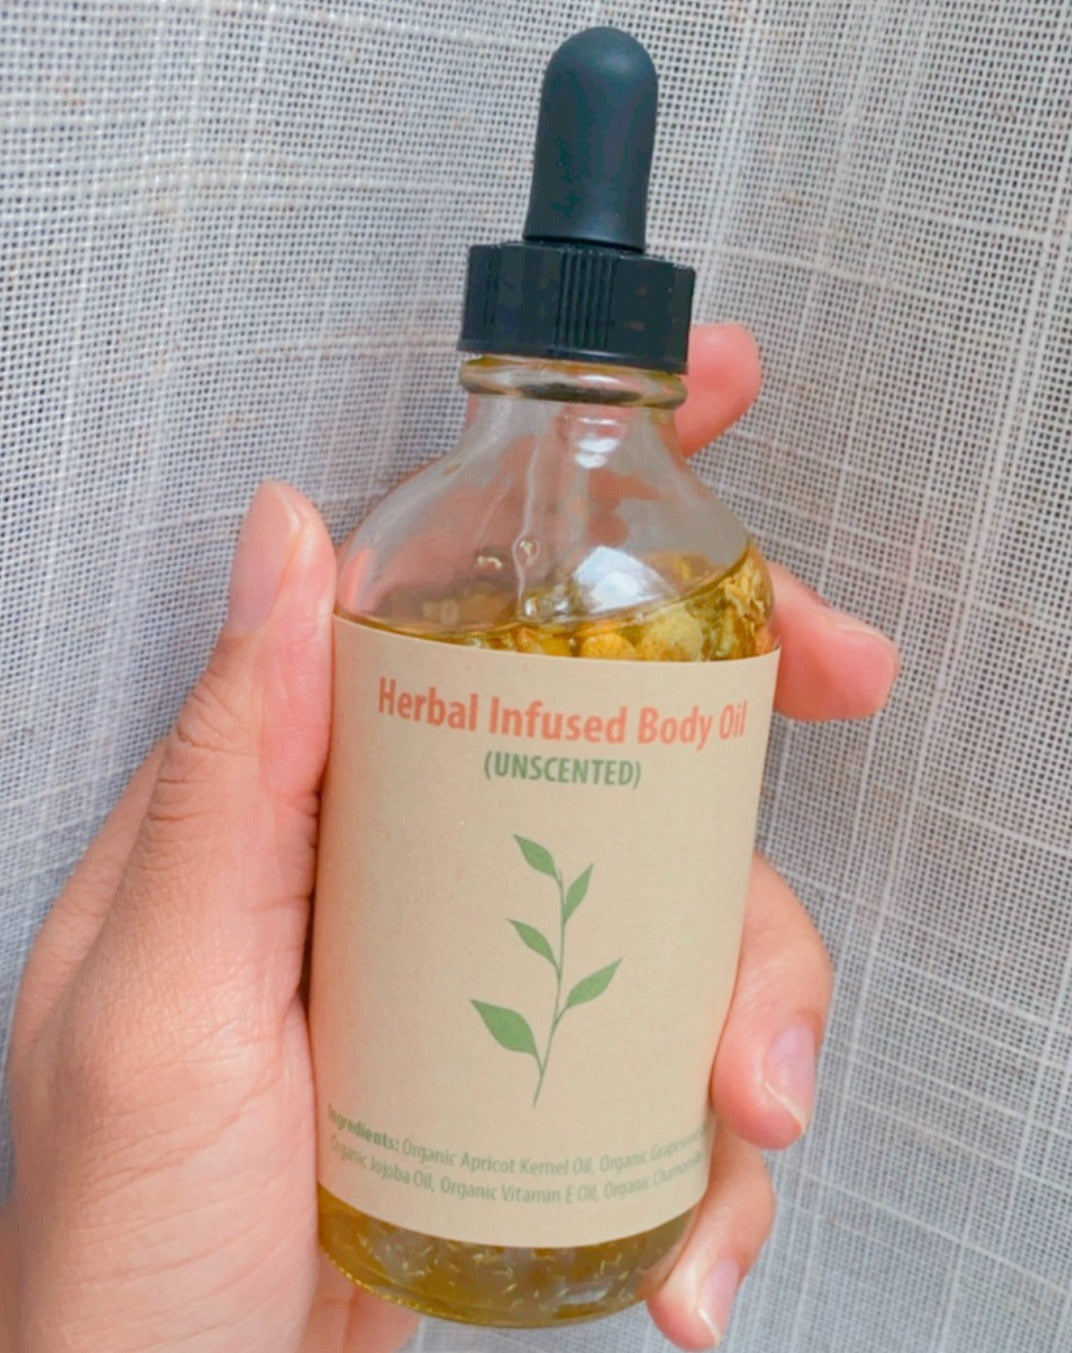 Herbal Infused Body Oil (Unscented)